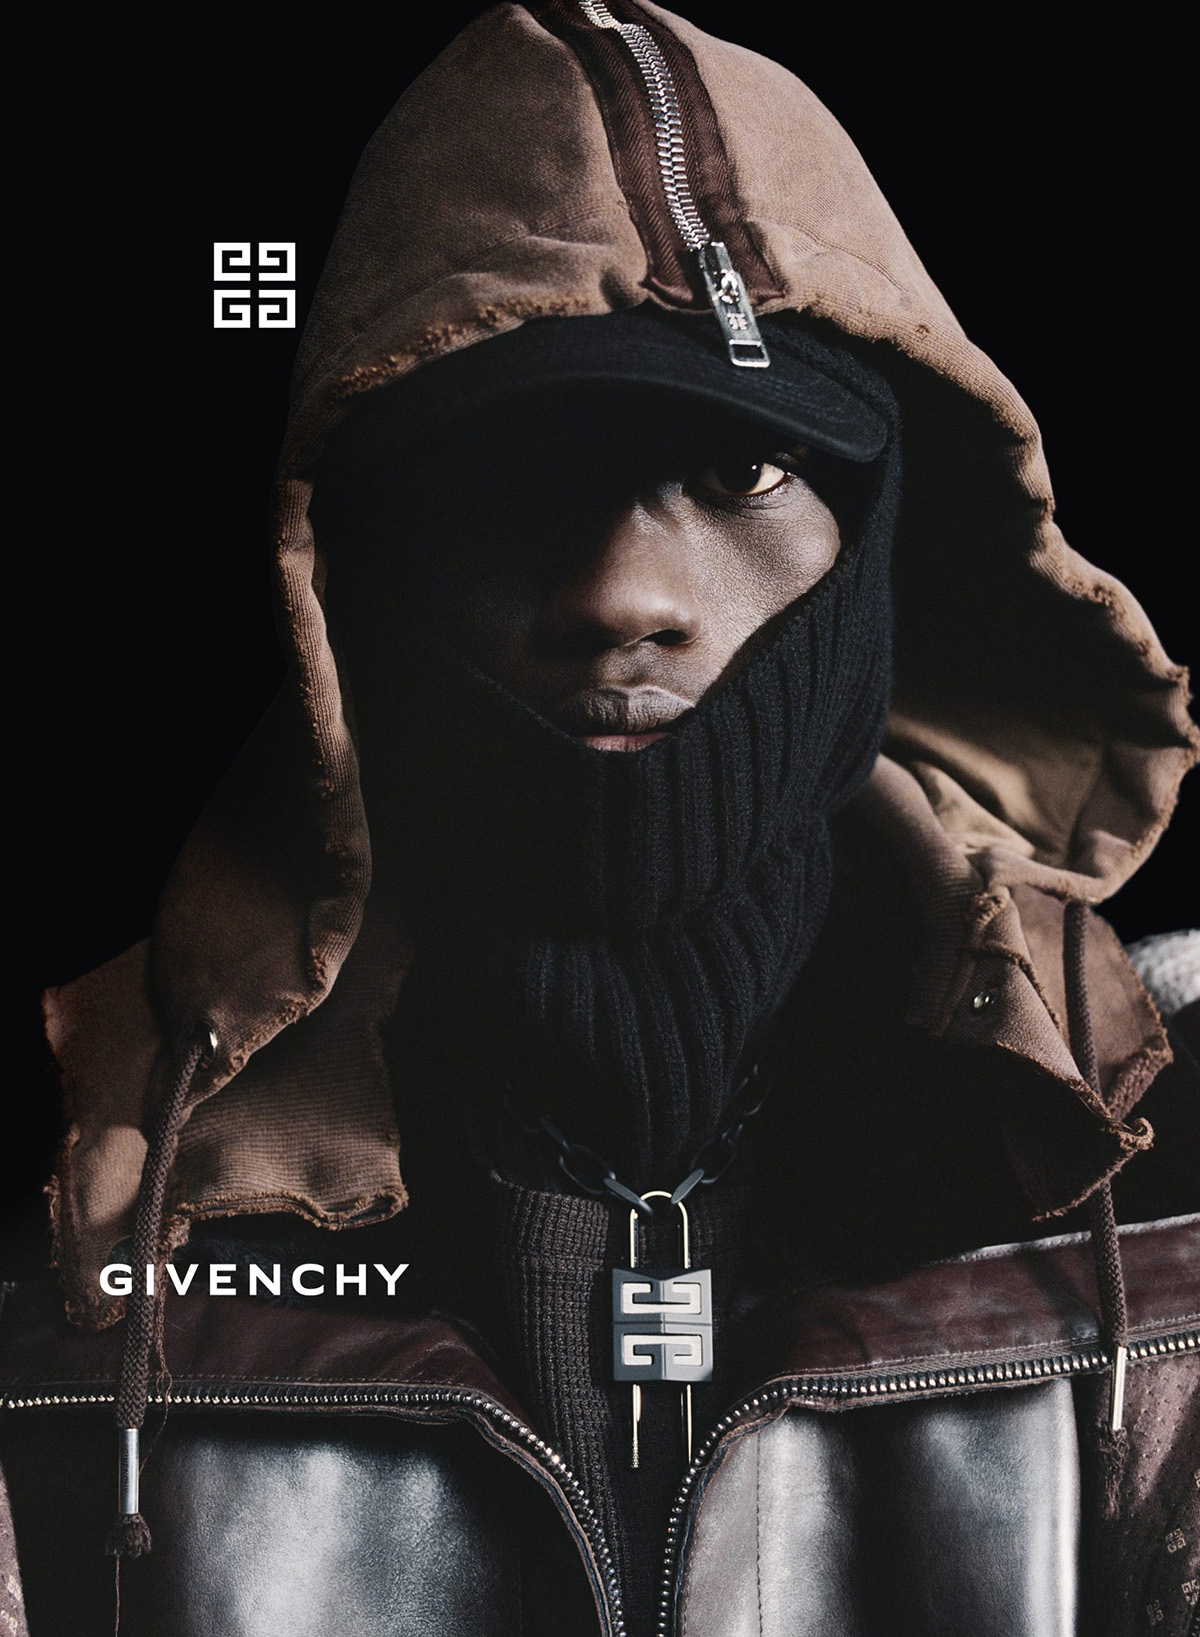 Givenchy Fall Winter 2021 Campaign